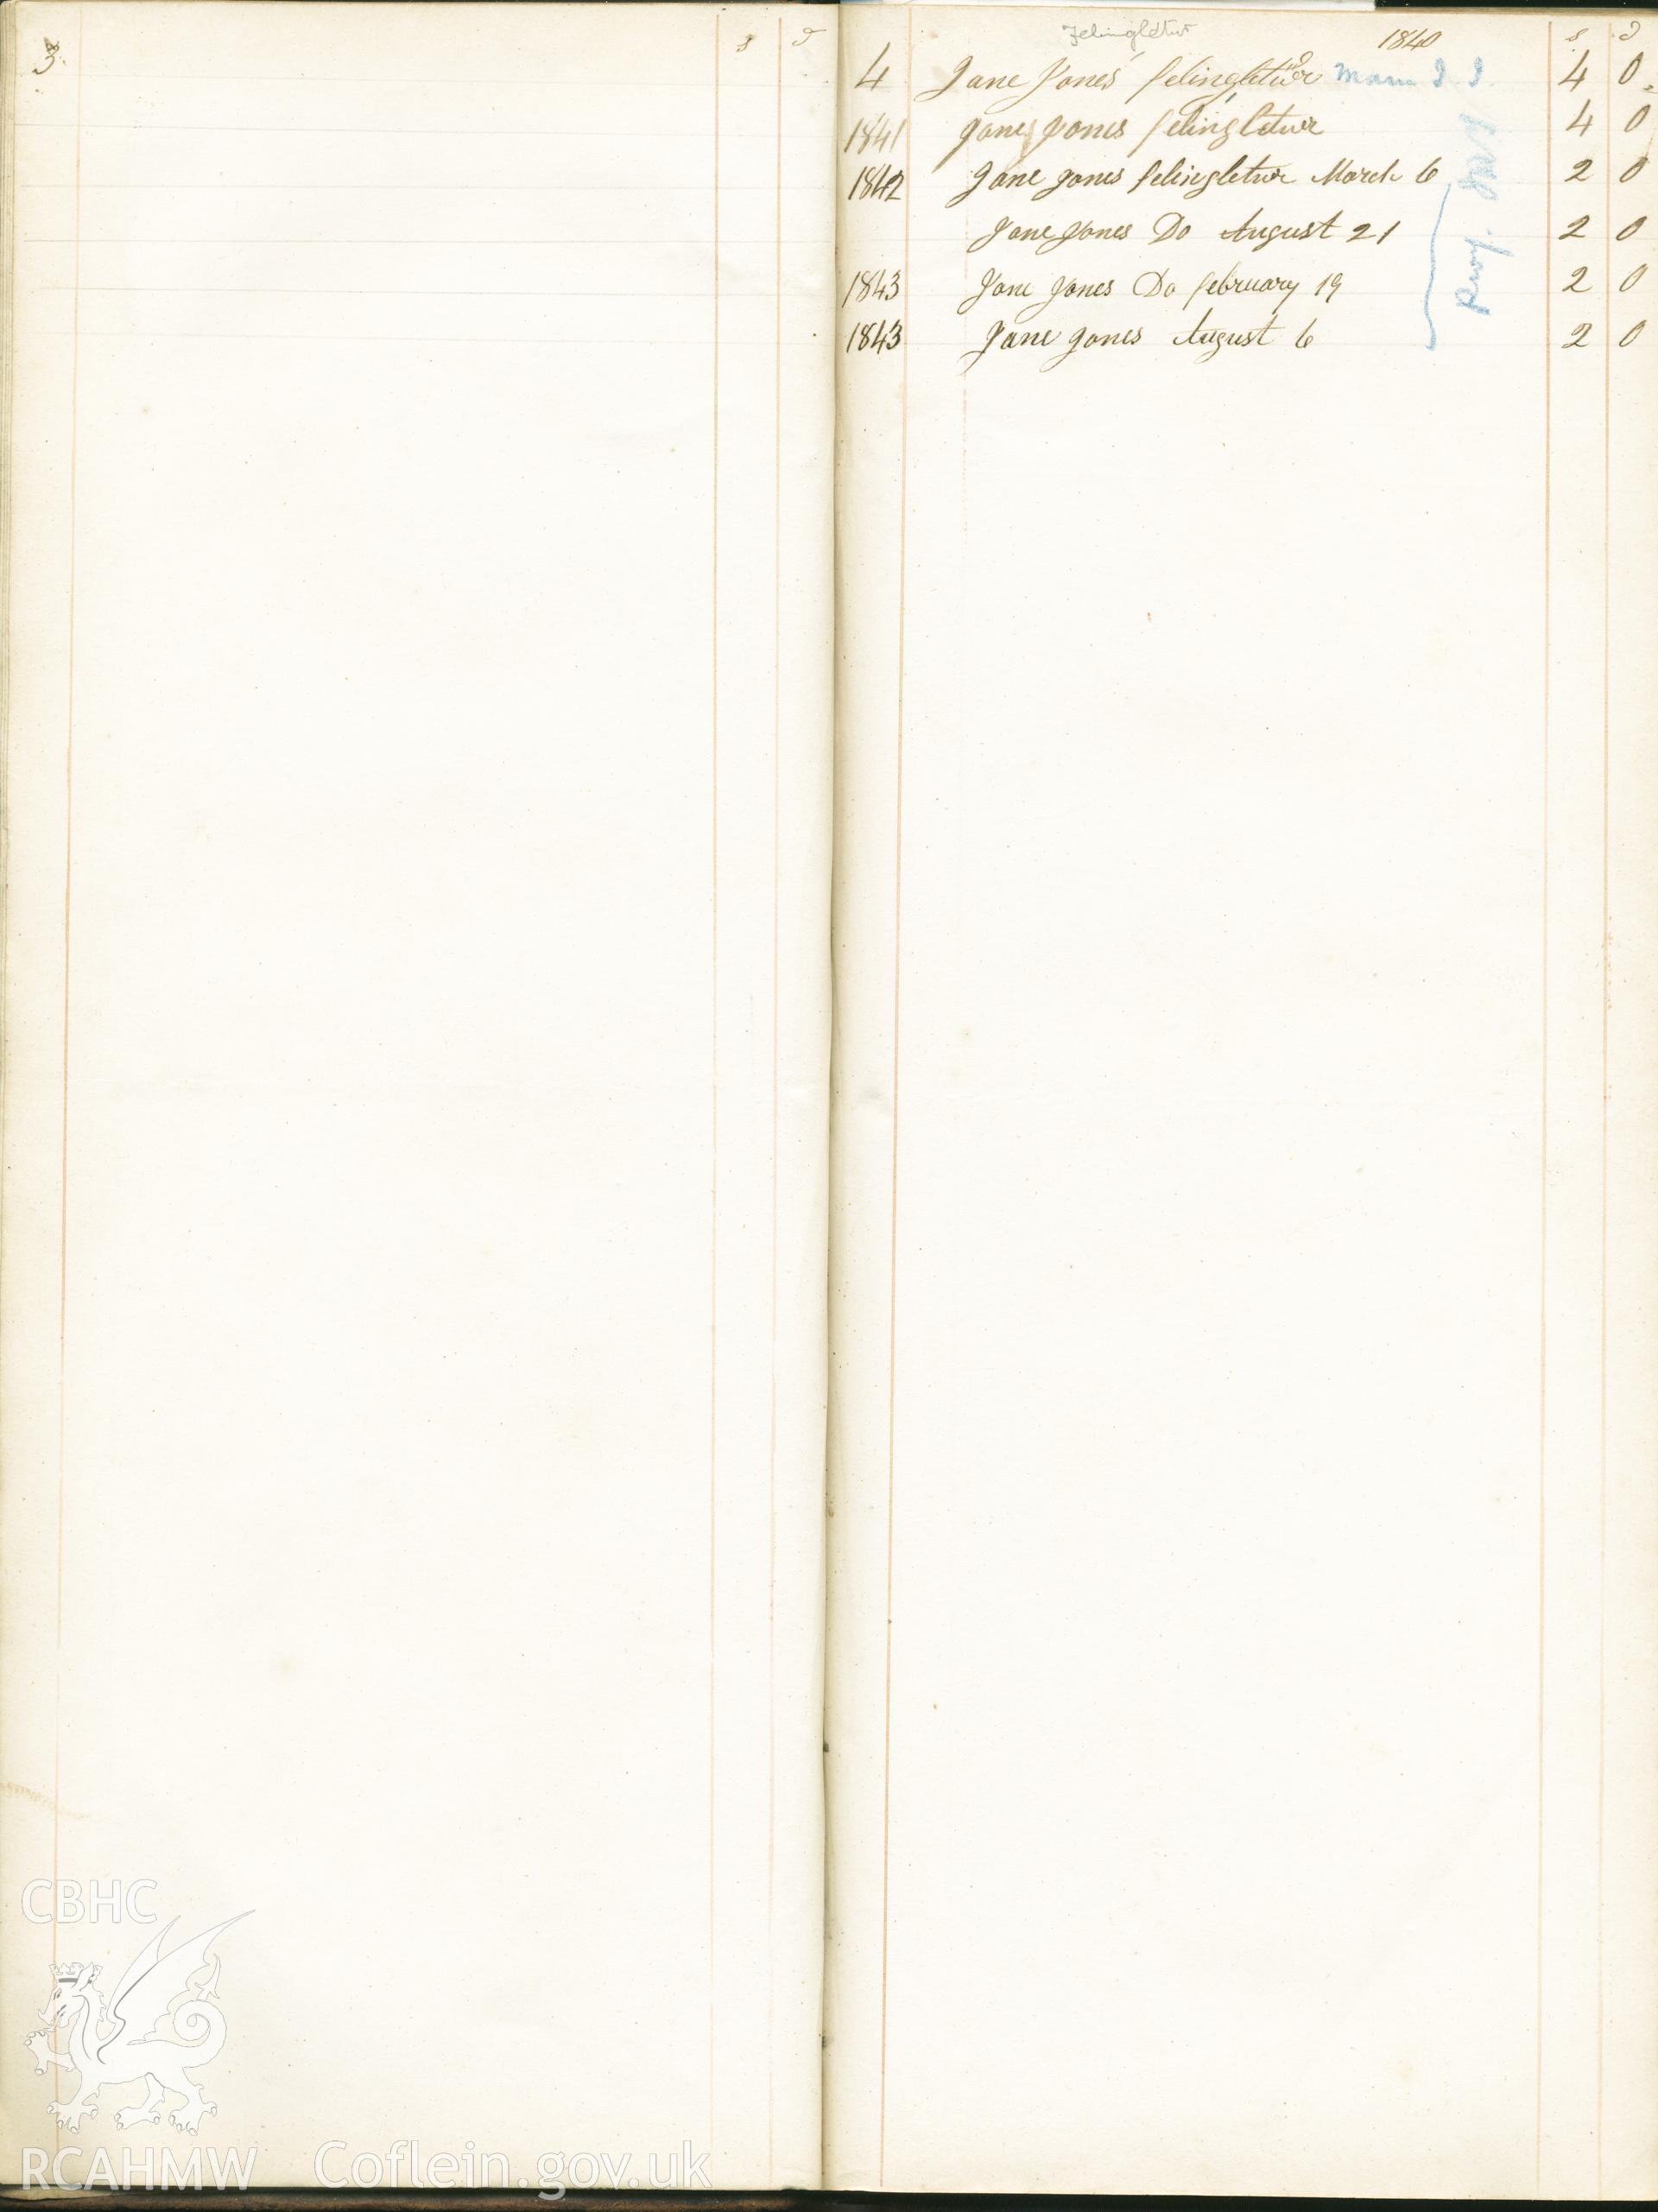 Handwritten subscribers book at Hen Gapel, Rhydowen. This page: money contributed in shillings (s) and pence (d). From 1840 - Jane Jones Felingletwr (4s) to 6th August 1843 with Jane Jones (2s) Donated to the RCAHMW as part of the Digital Dissent Project.